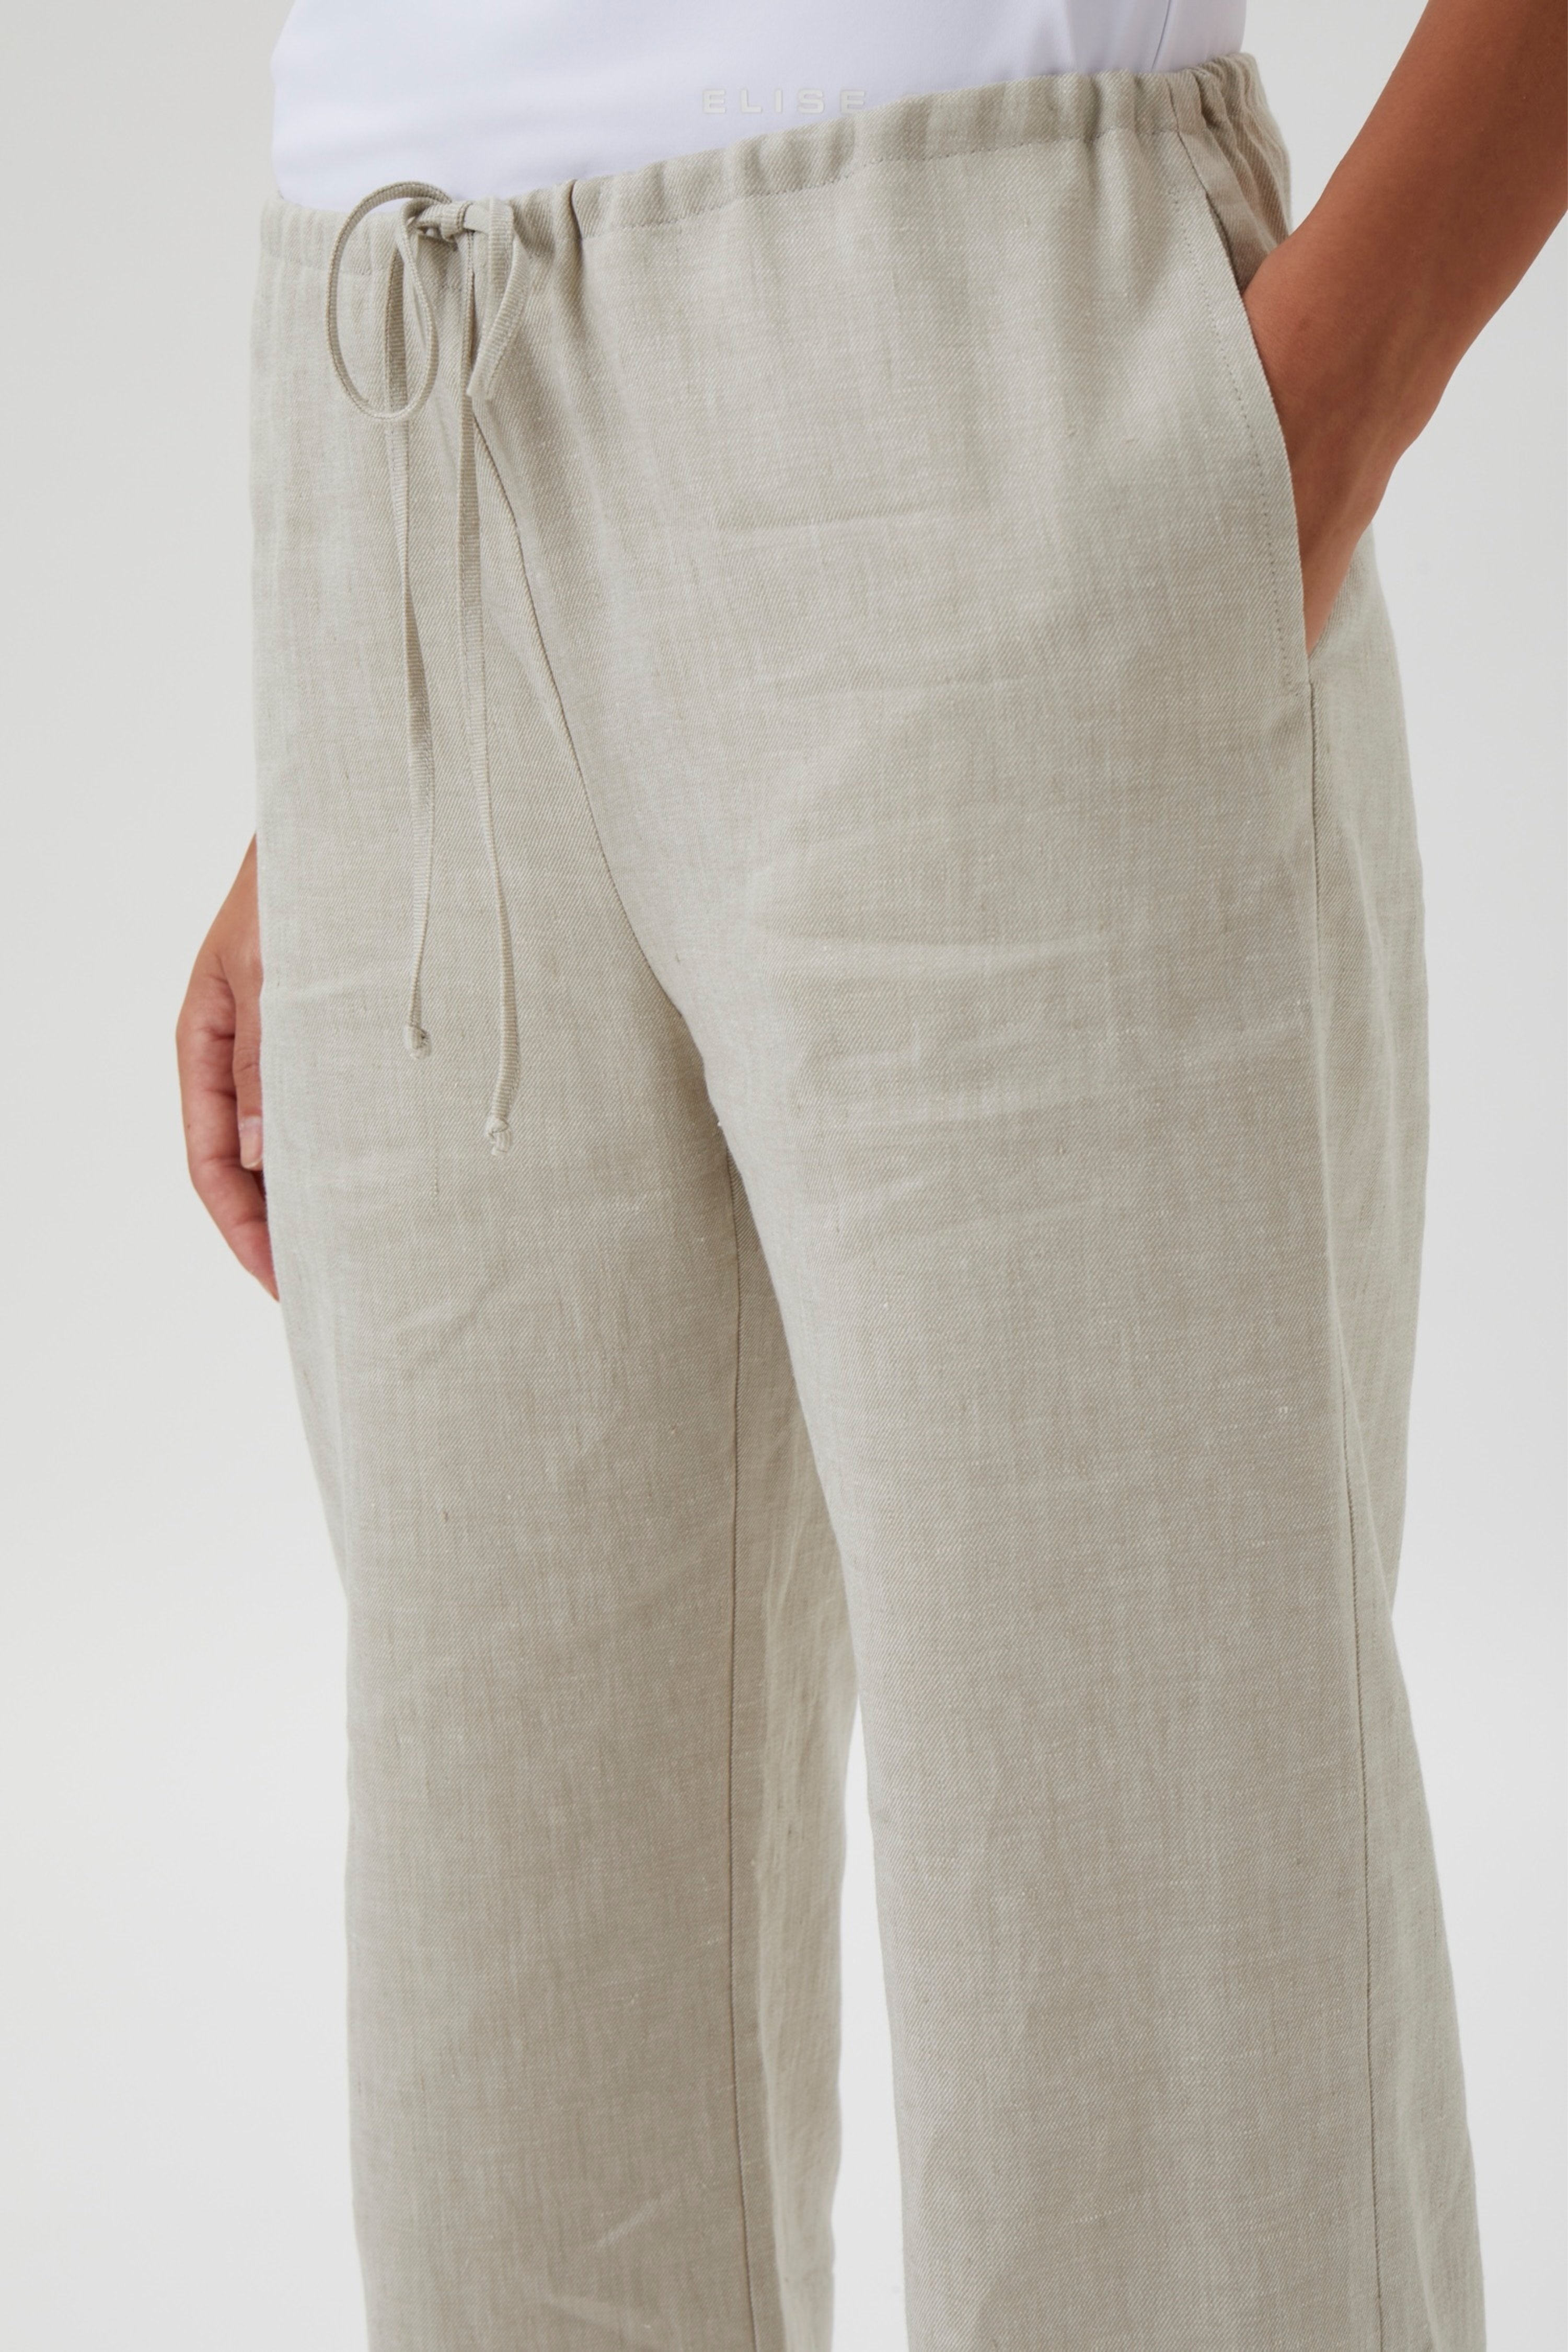 linen pants with drawstring